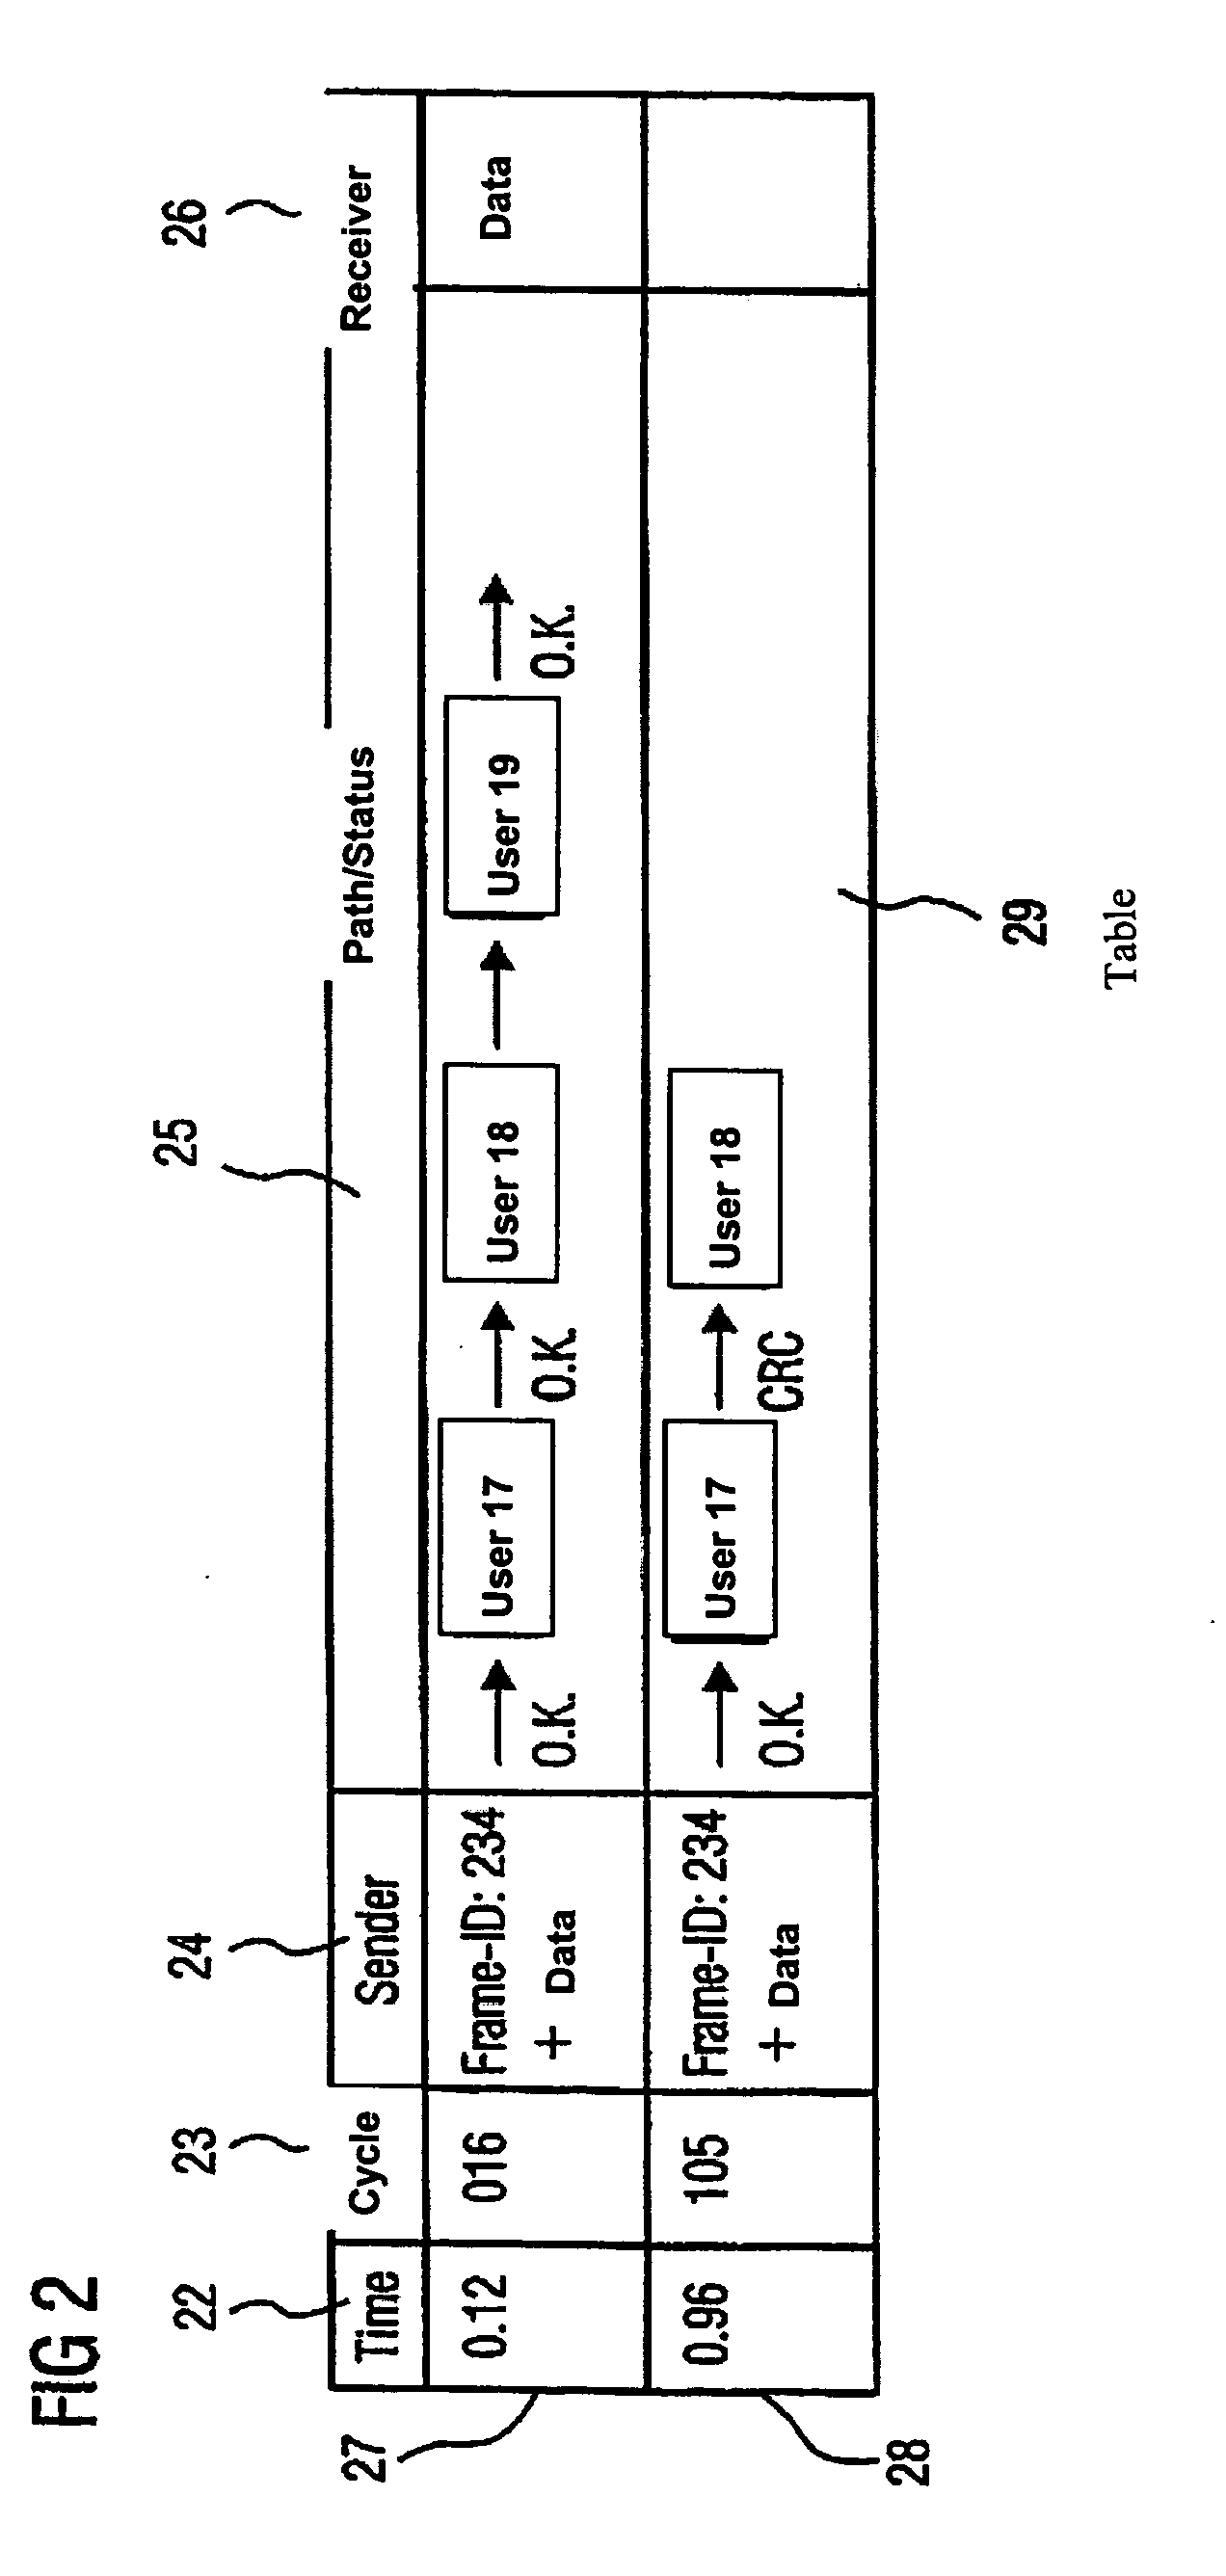 Communication system with users and diagnostic units